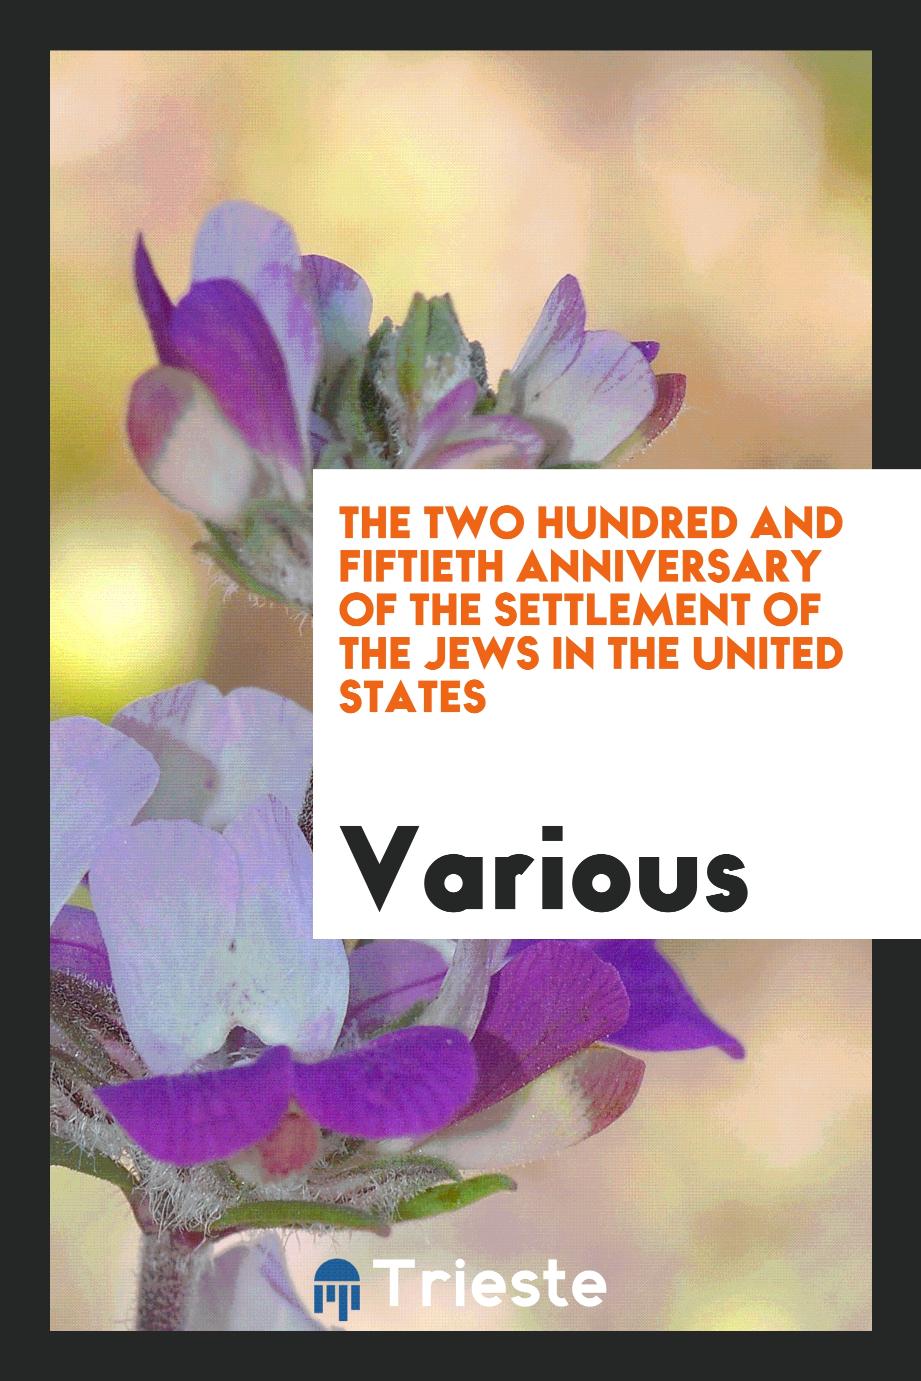 The two hundred and fiftieth anniversary of the settlement of the jews in the United States